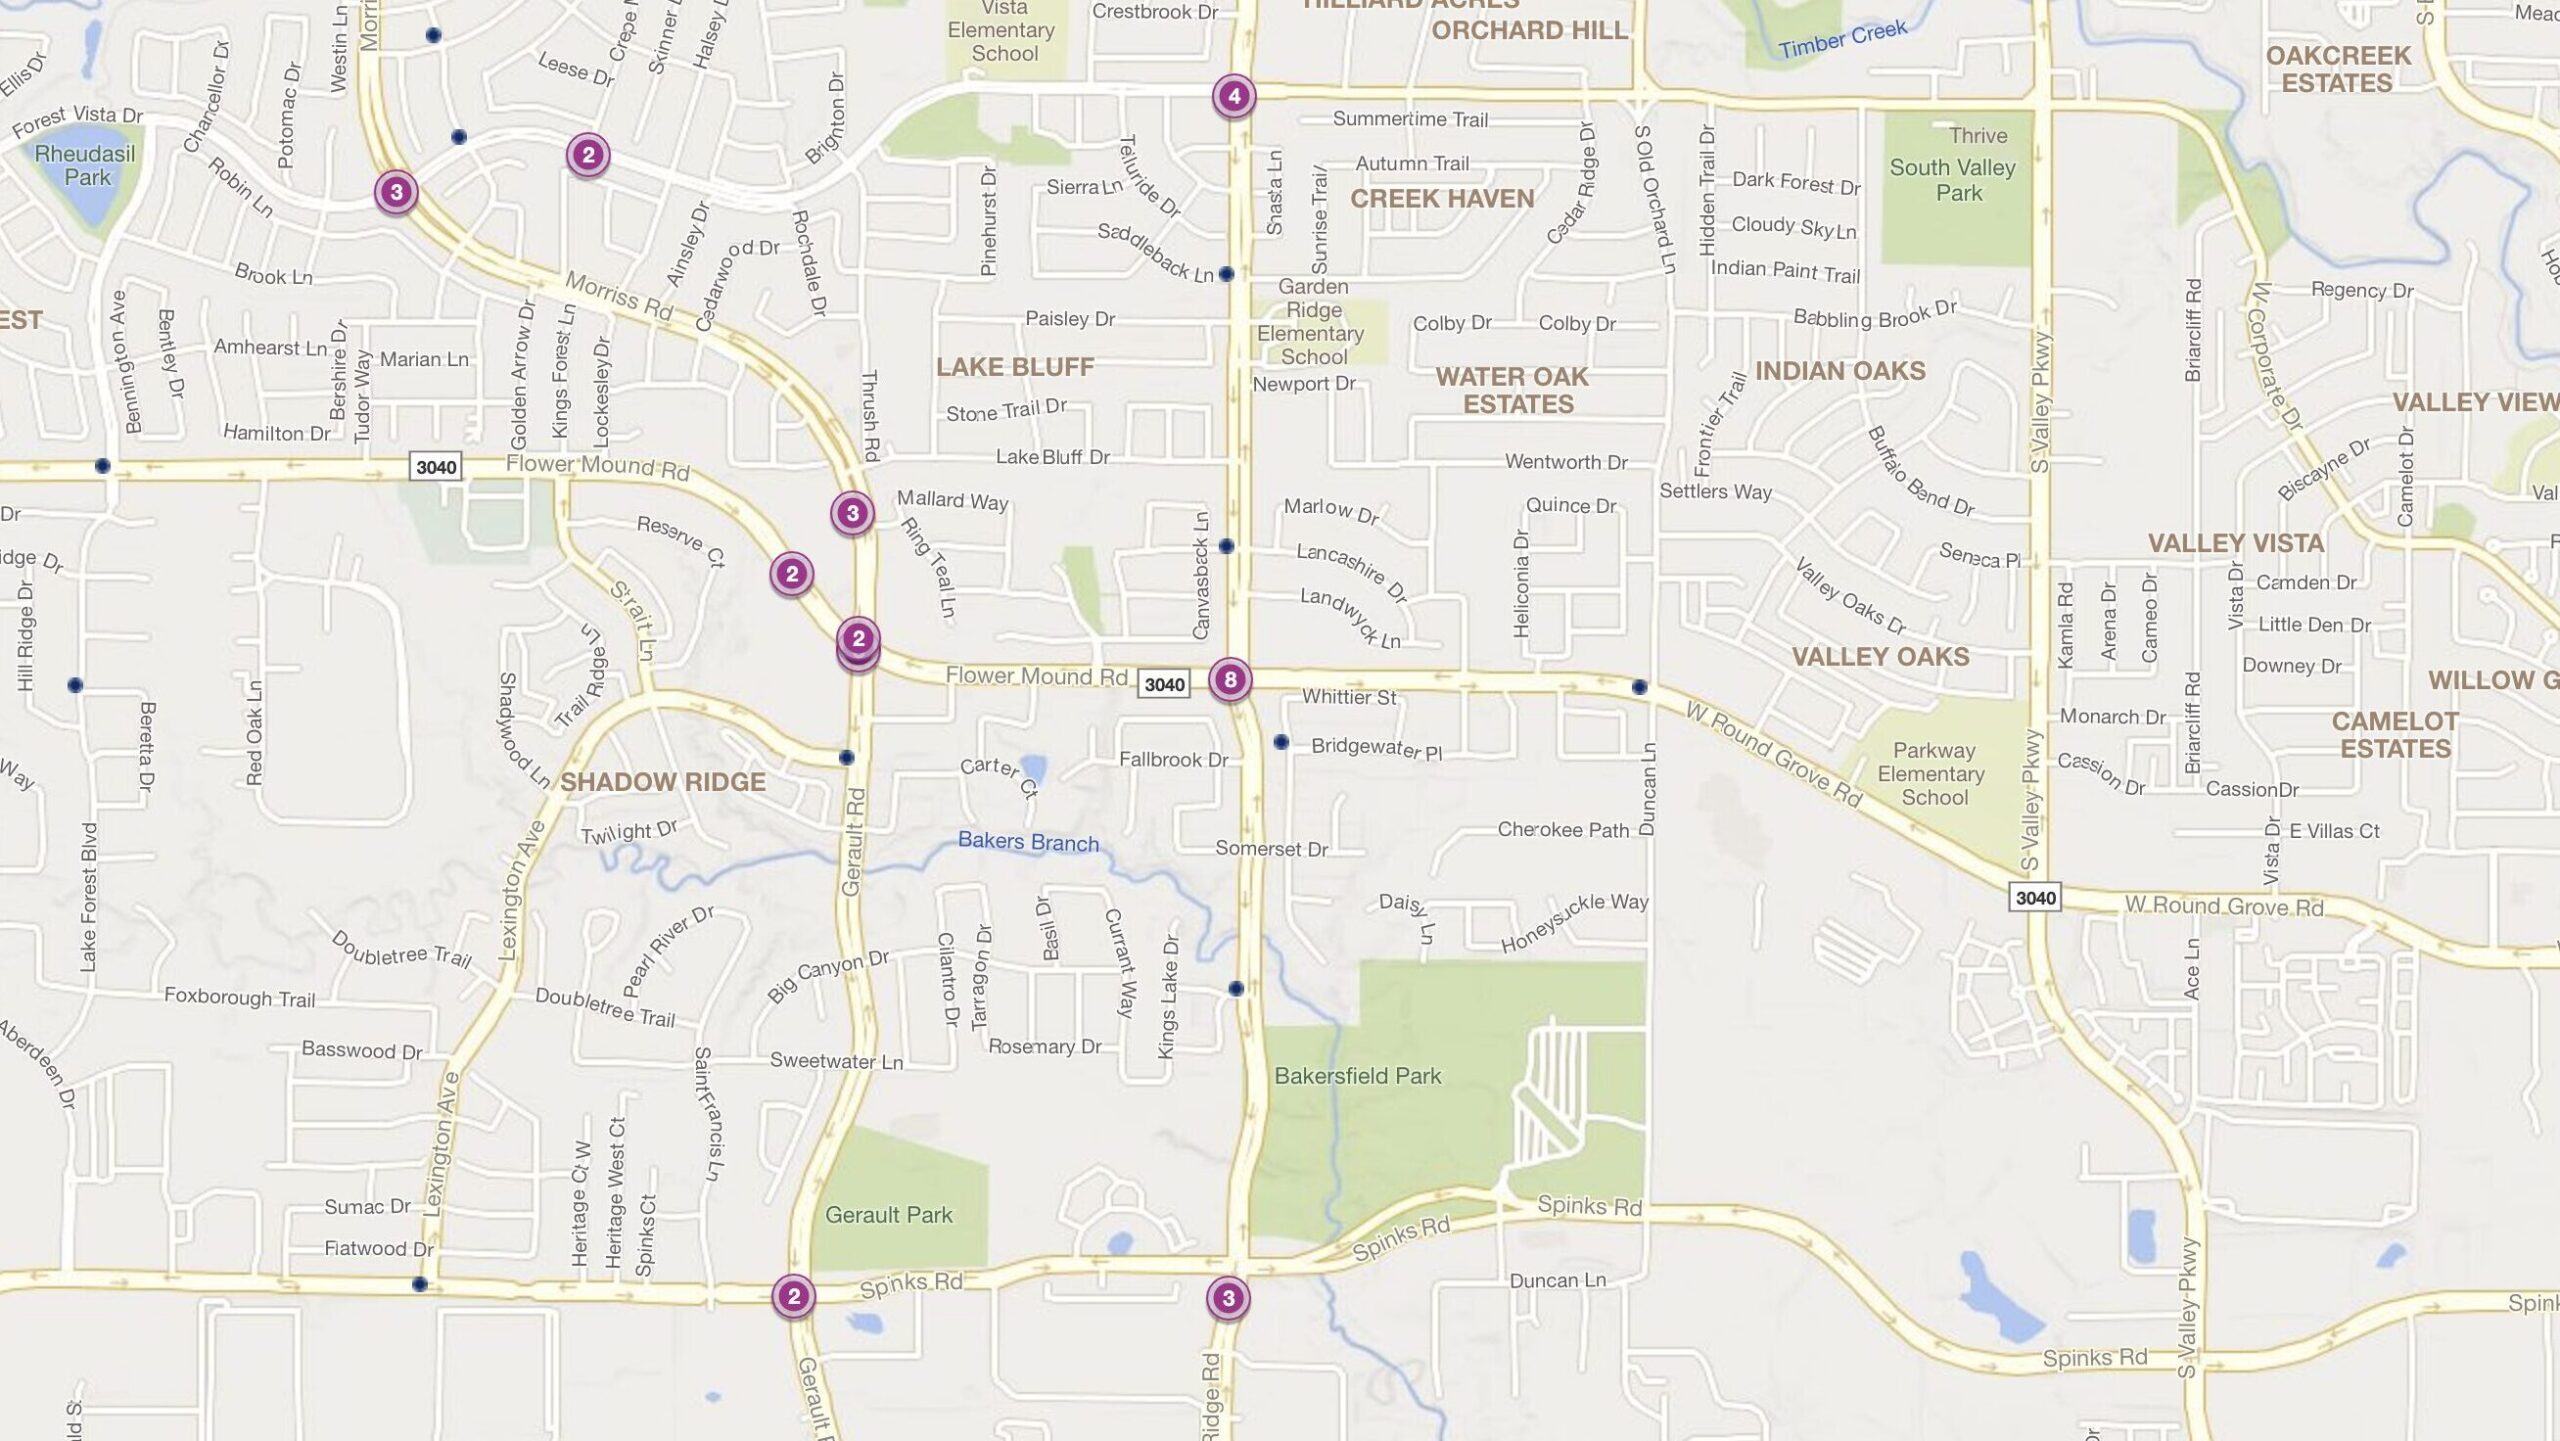 Cluster Map of 2023 Car Accidents at Flower Mound Rd. & Garden Ridge Rd. (TXDOT)